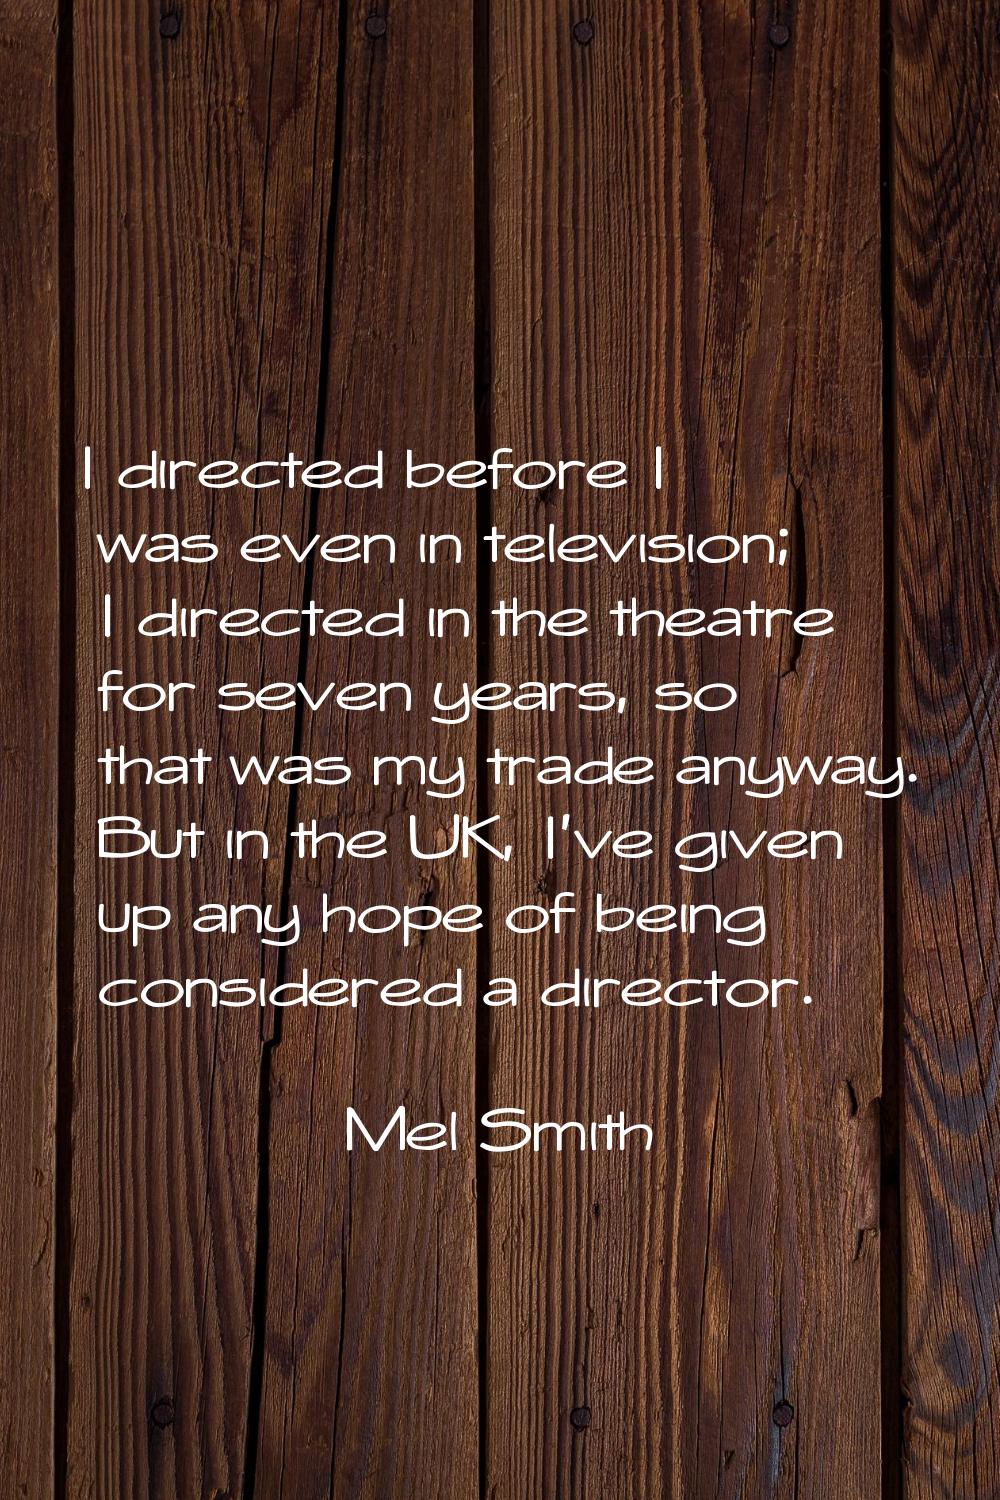 I directed before I was even in television; I directed in the theatre for seven years, so that was 